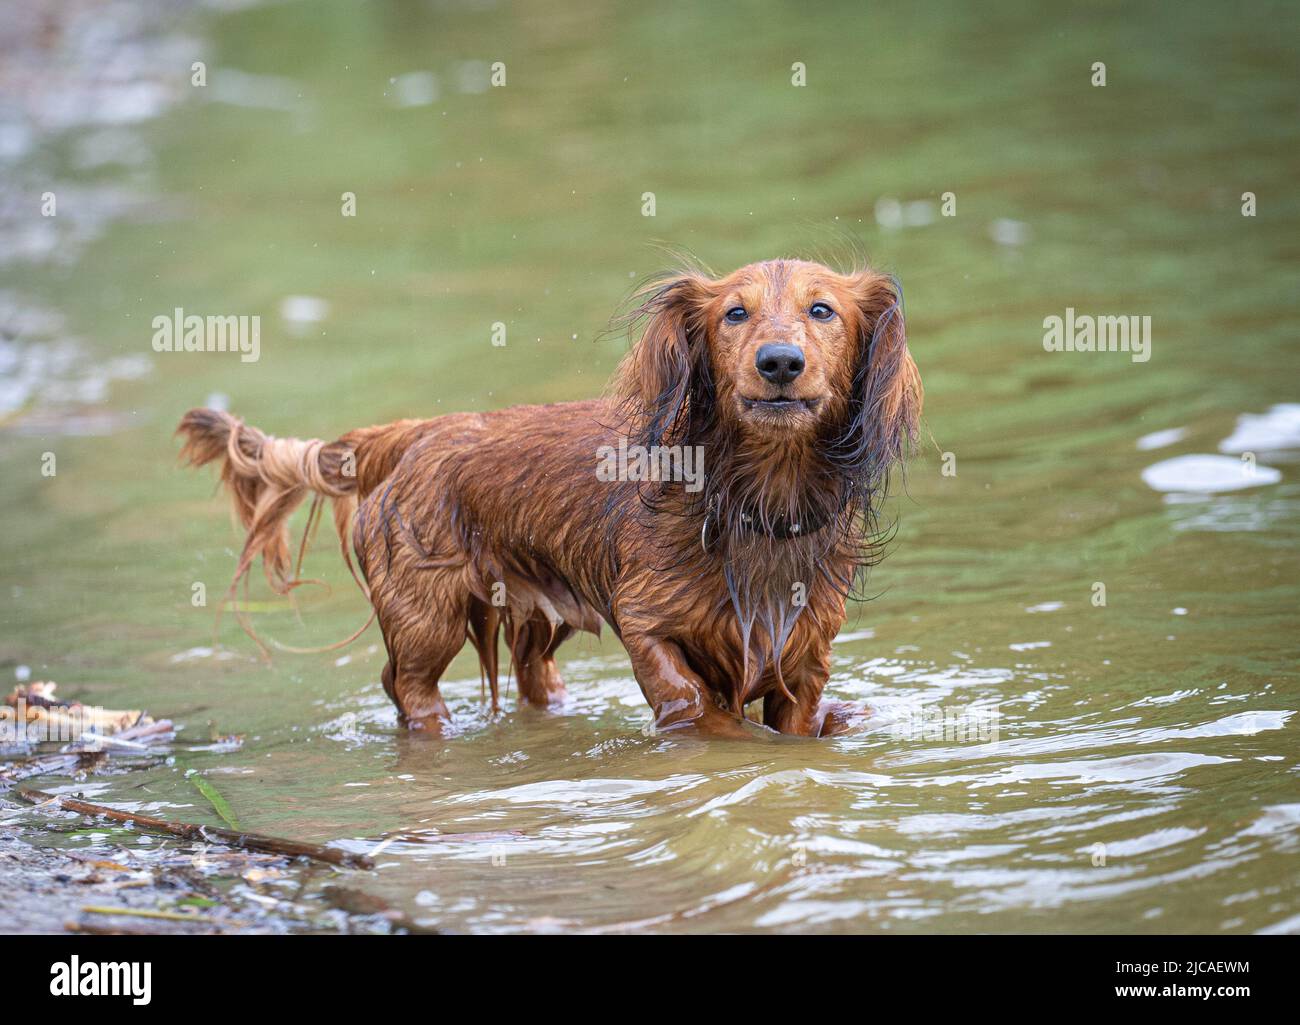 Wet dachshund sausage dog standing in the water and staring straight ahead Stock Photo